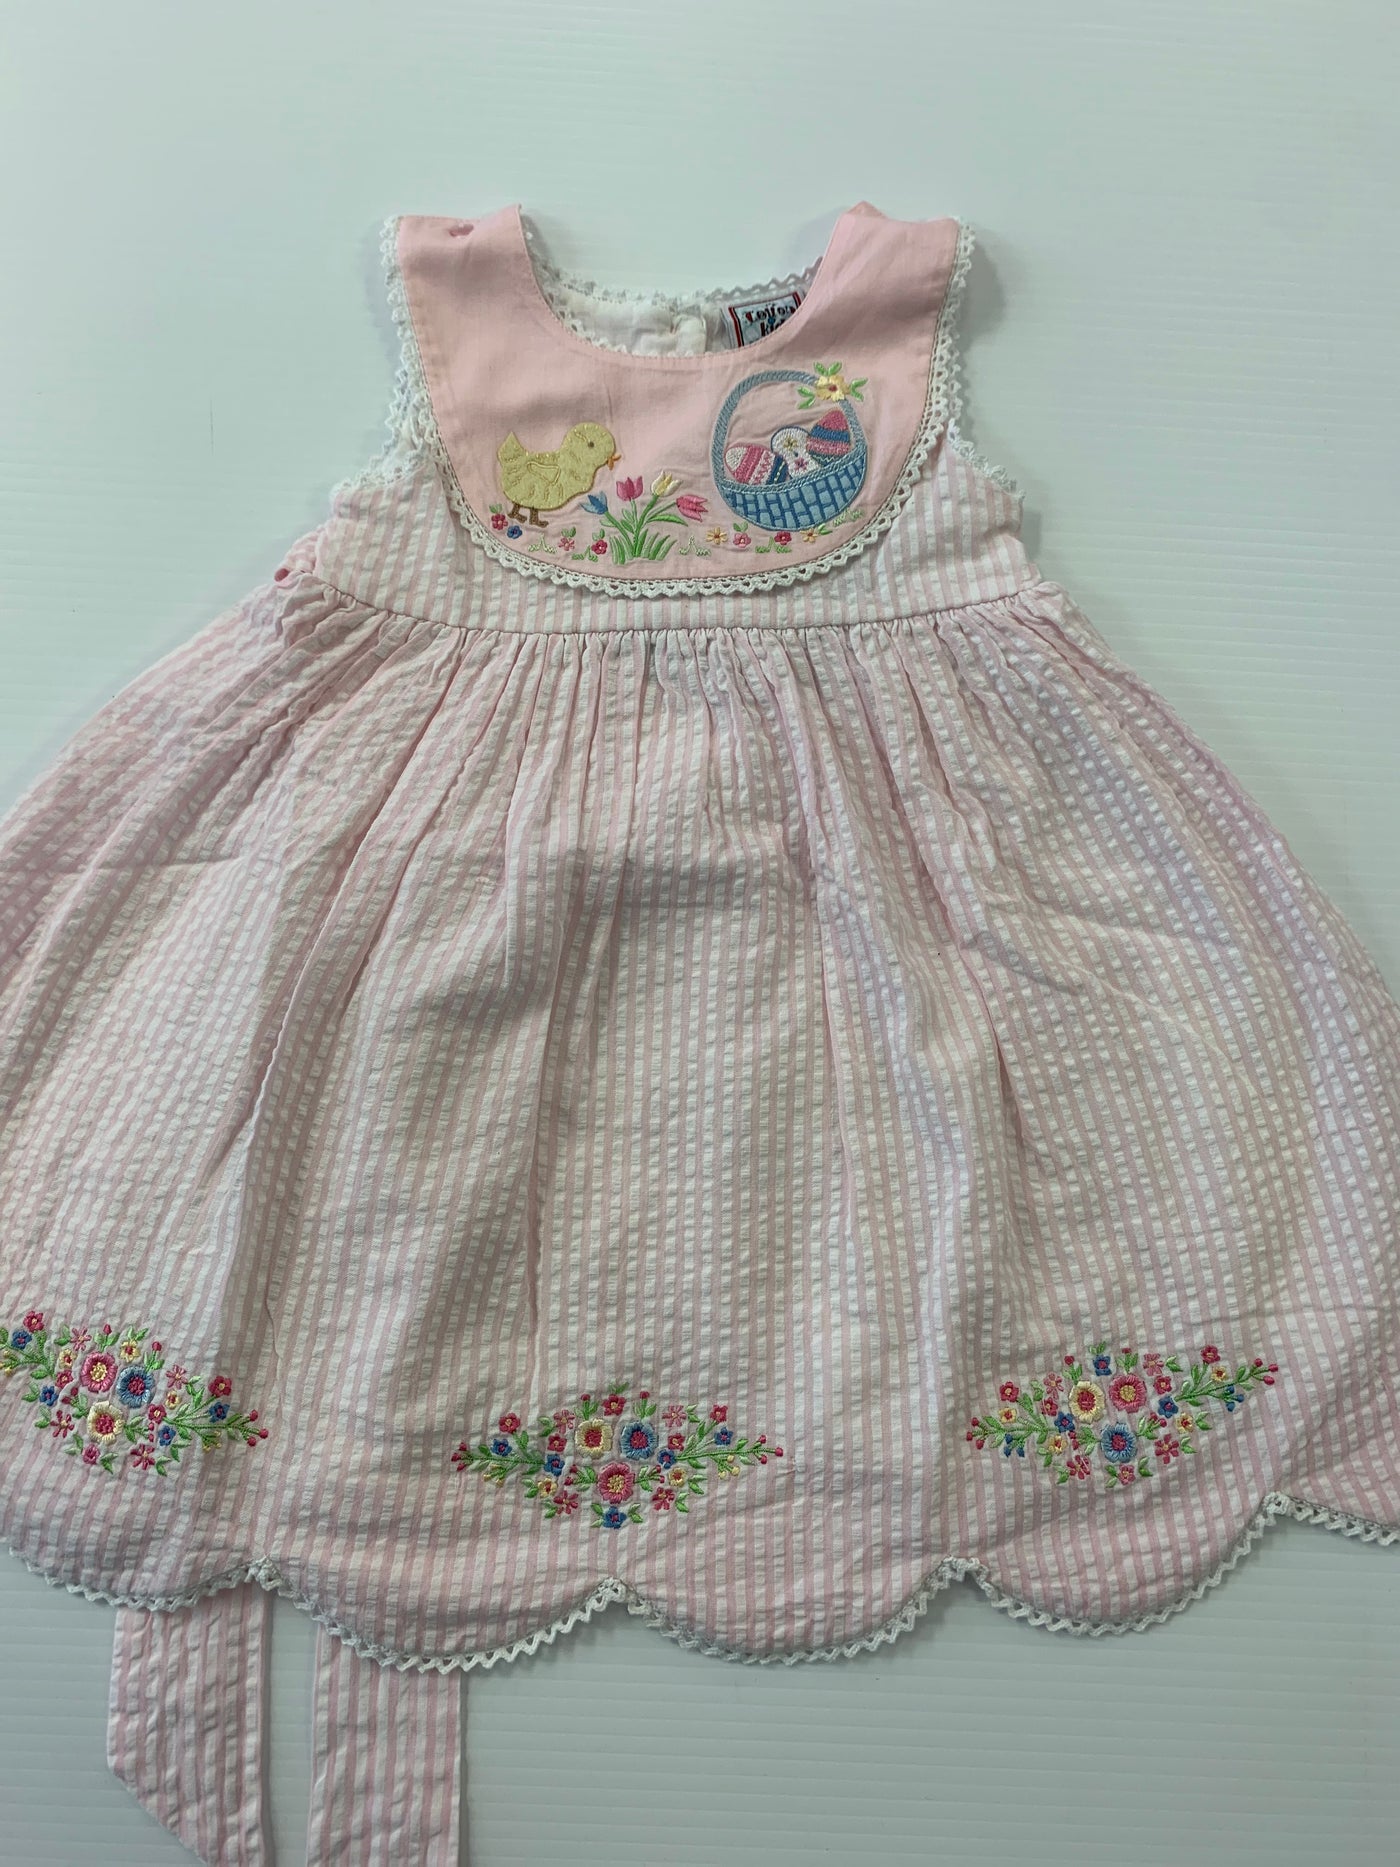 Embroidered chick and floral dress